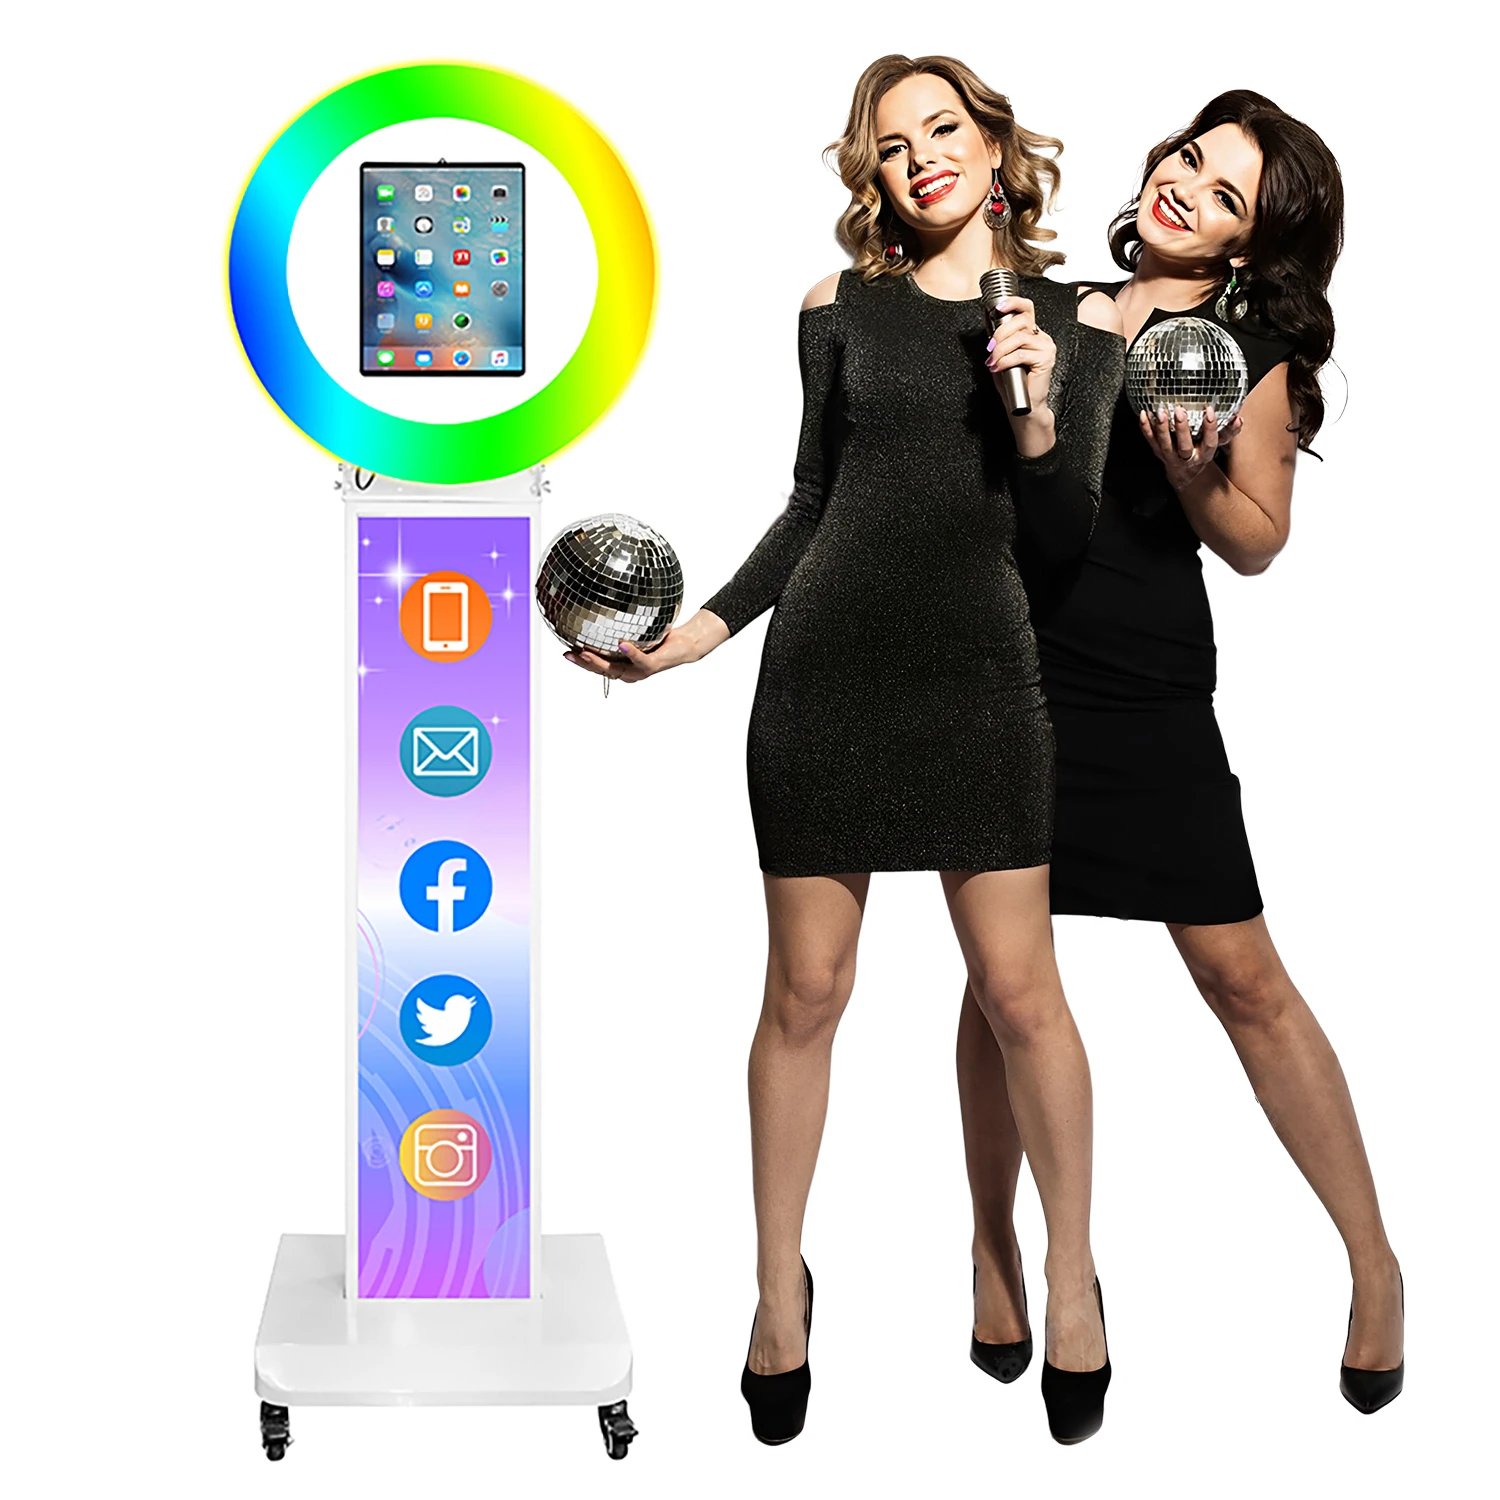 

Photo Booth Machine Stand for iPad with RGB Ring Lights Selfie iPad Photobooth Shell for Rental Business Christmas